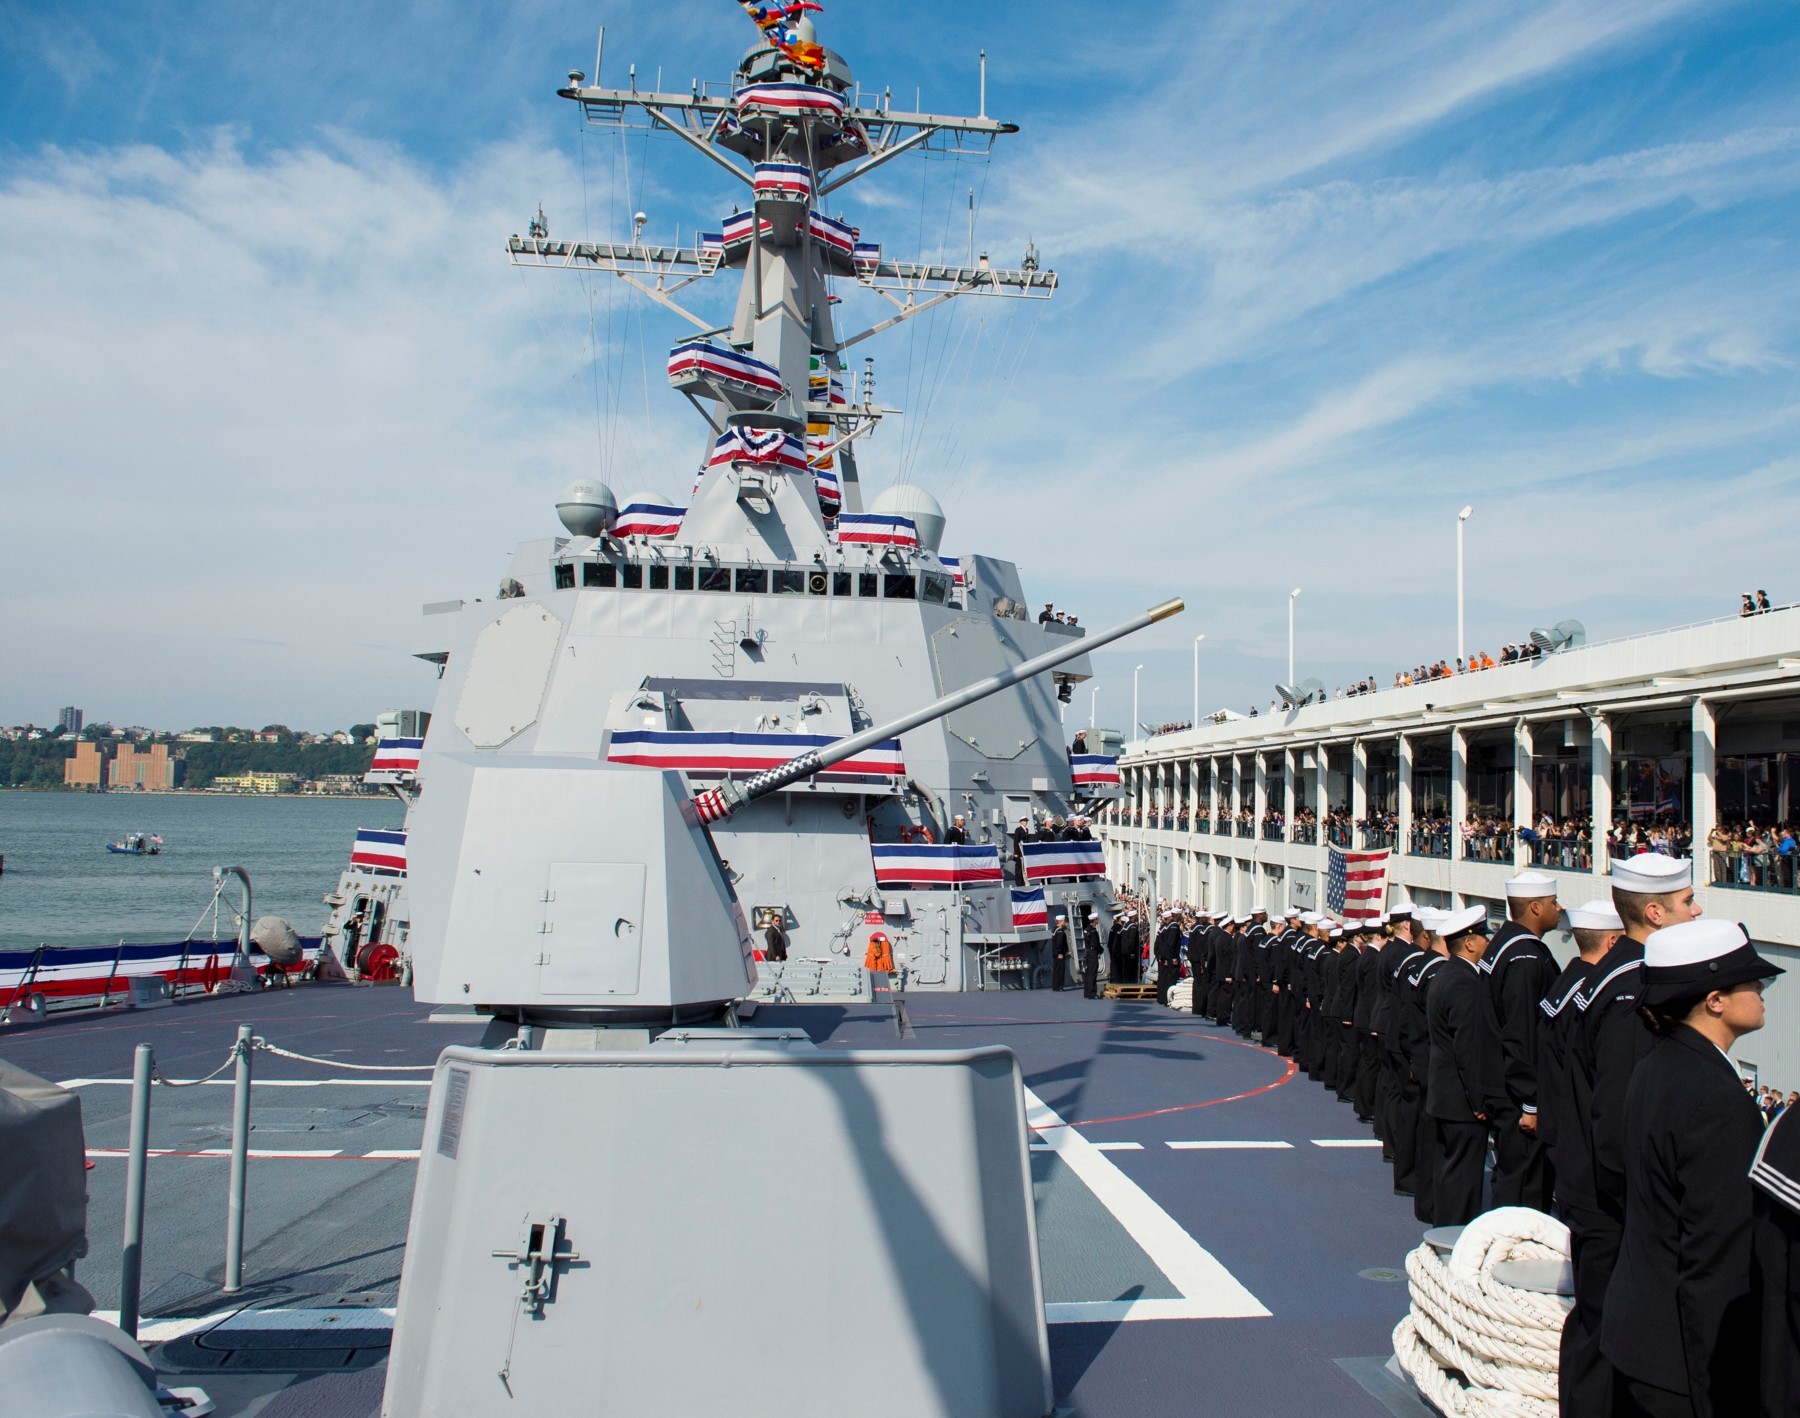 ddg-112 uss michael murphy arleigh burke class guided missile destroyer aegis us navy commissioning 2012 77p